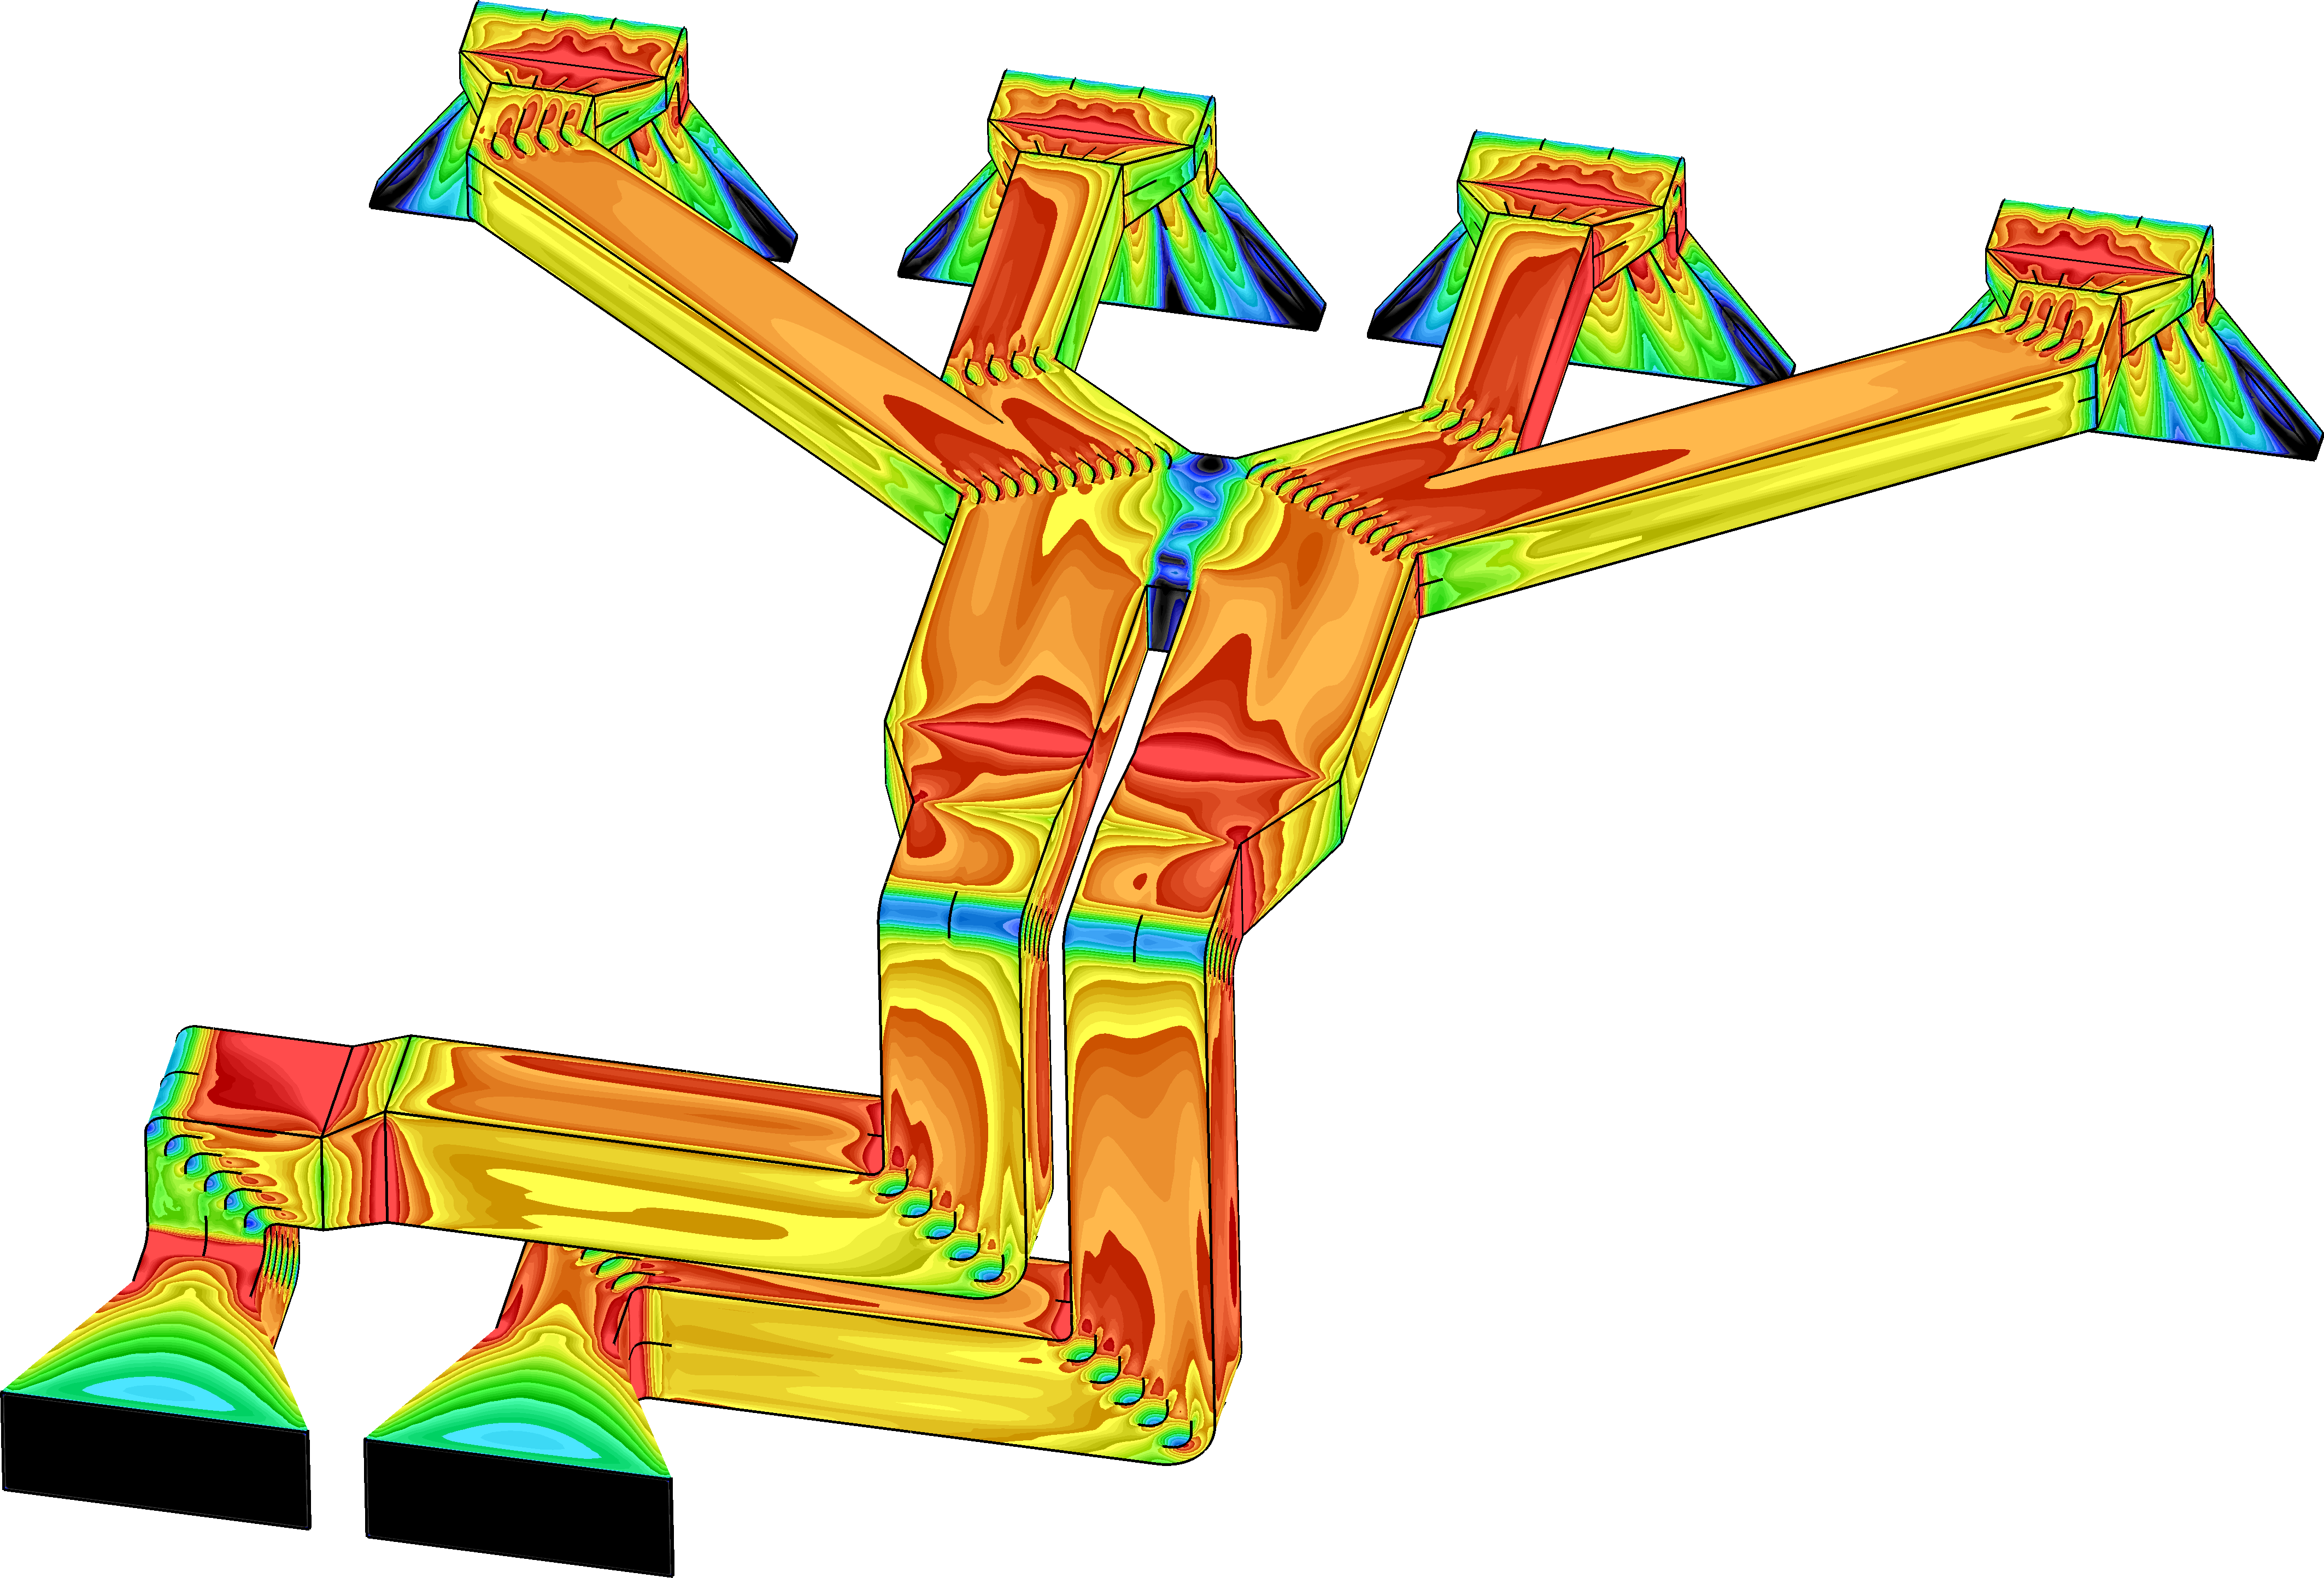 cfd model of power plant ductwork